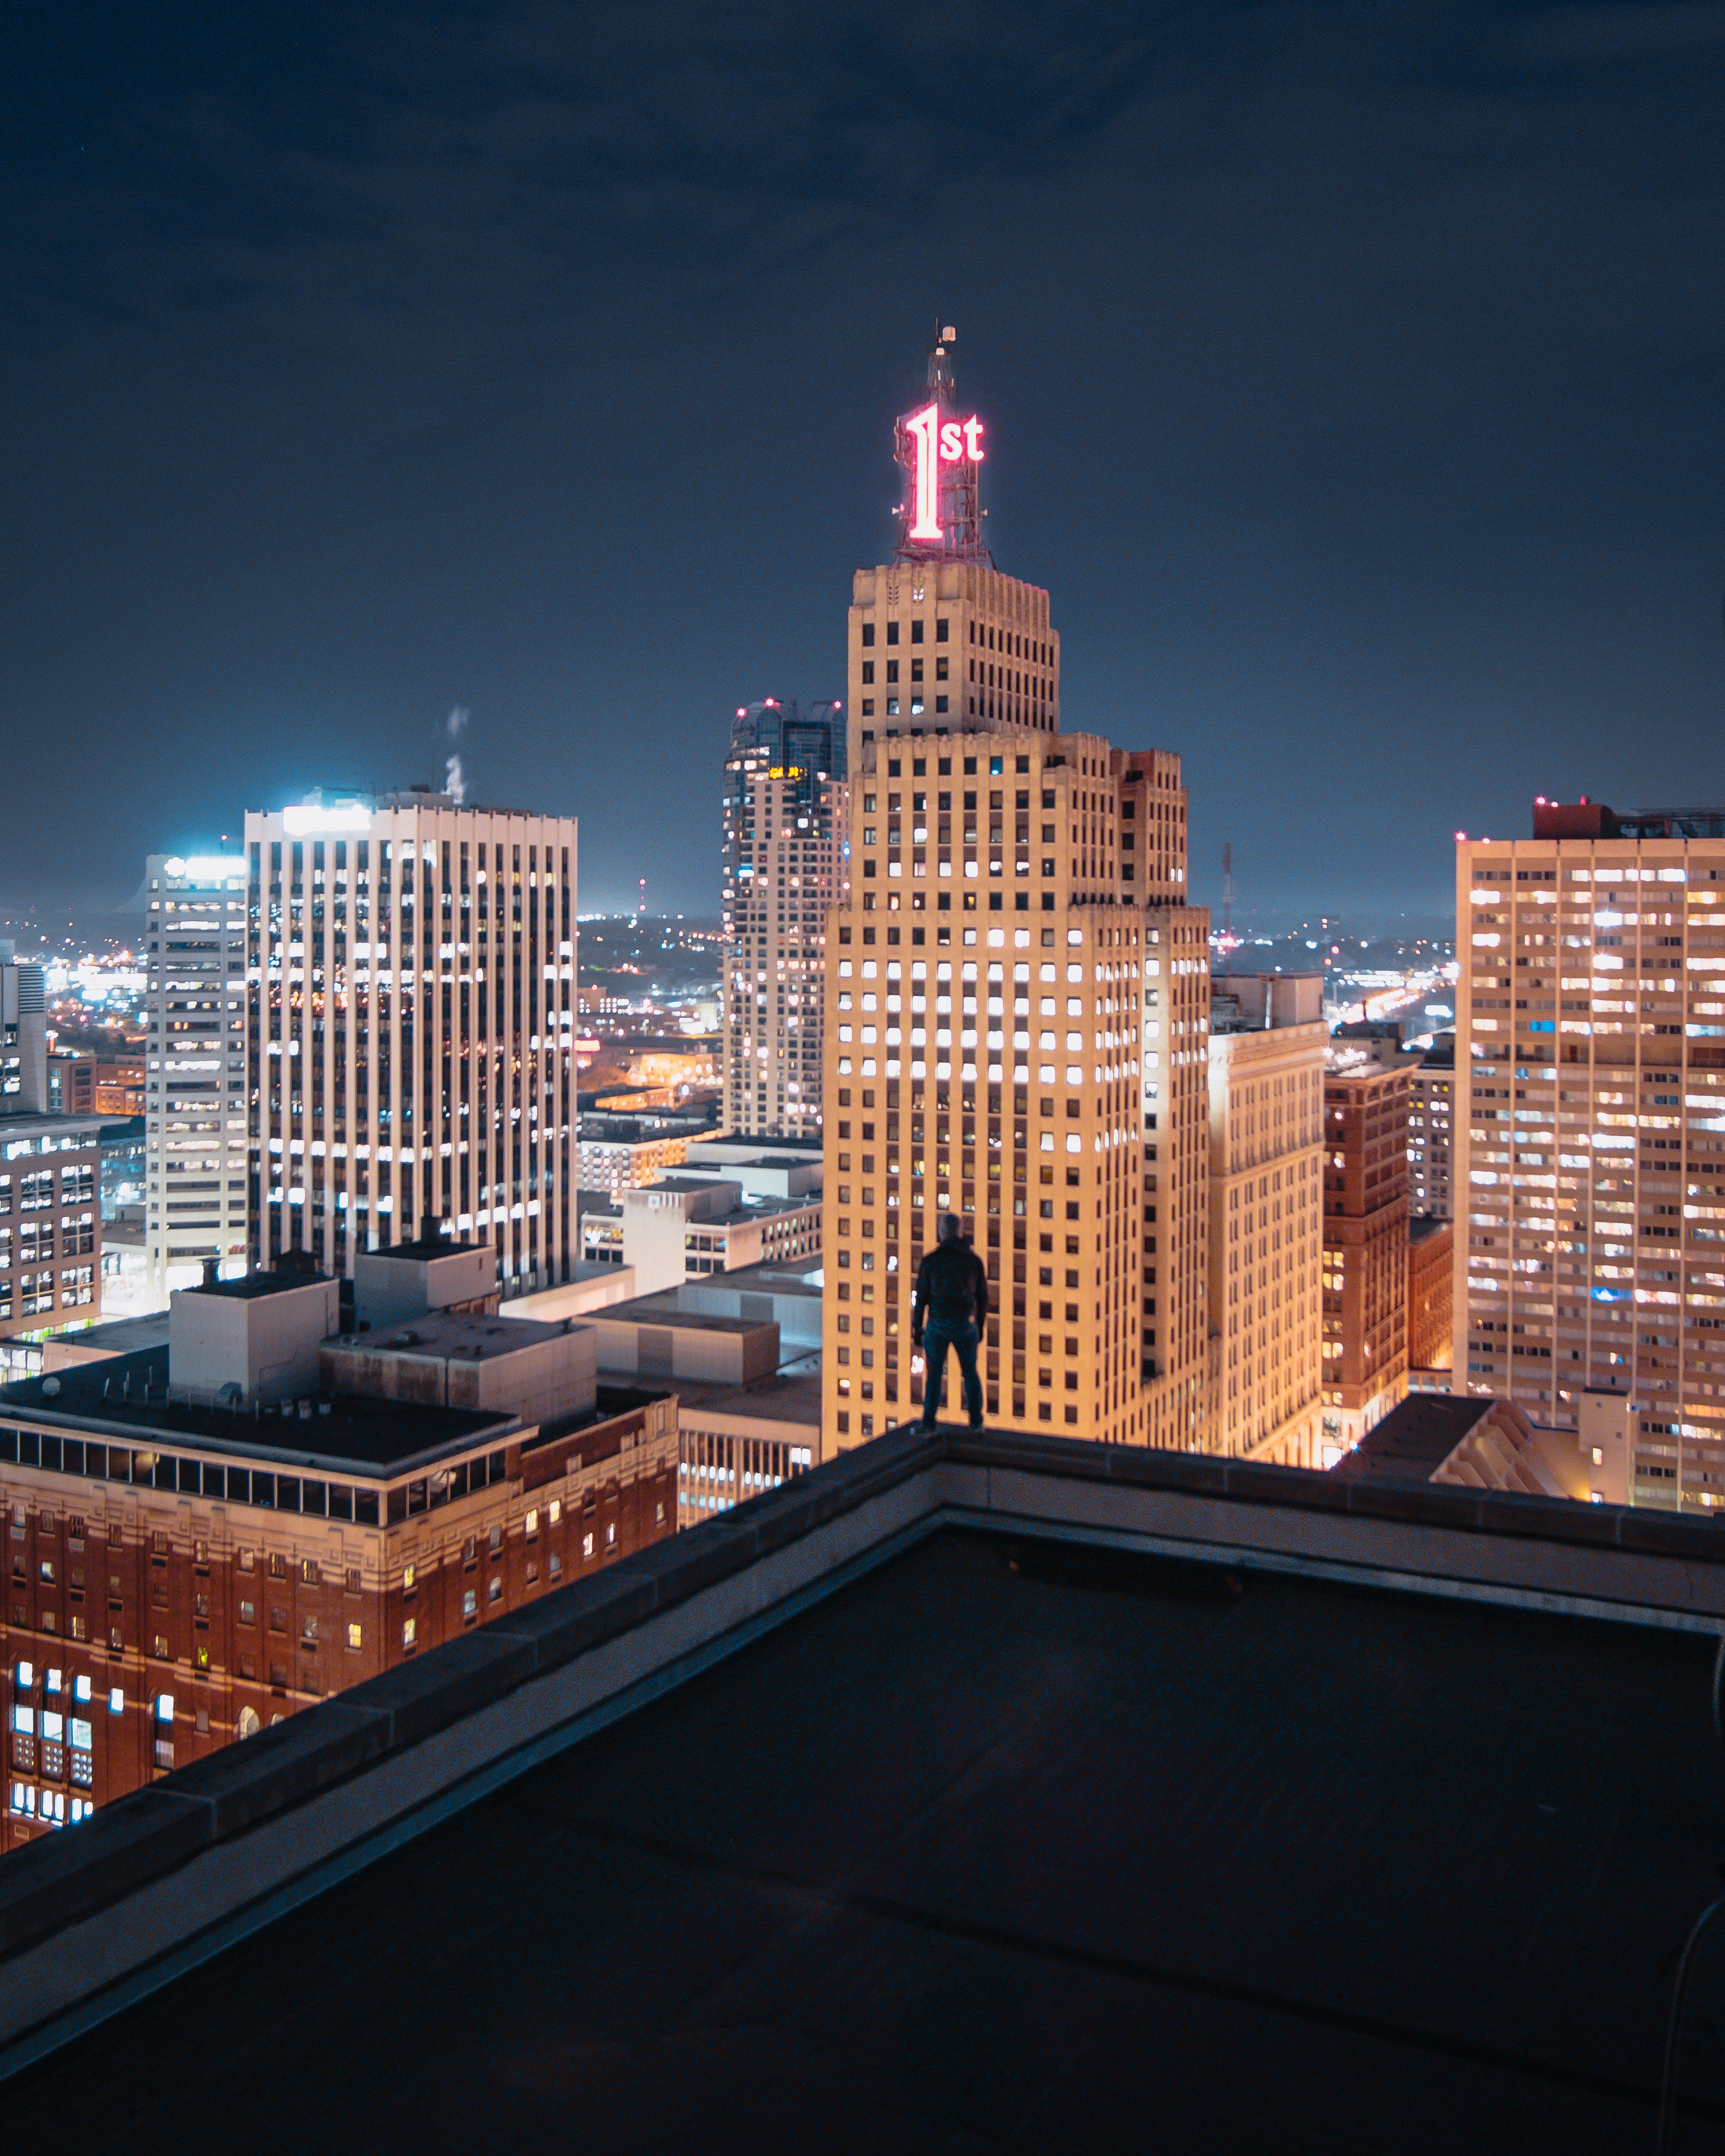 cities, building, lights, silhouette, night city, overview, review, roof